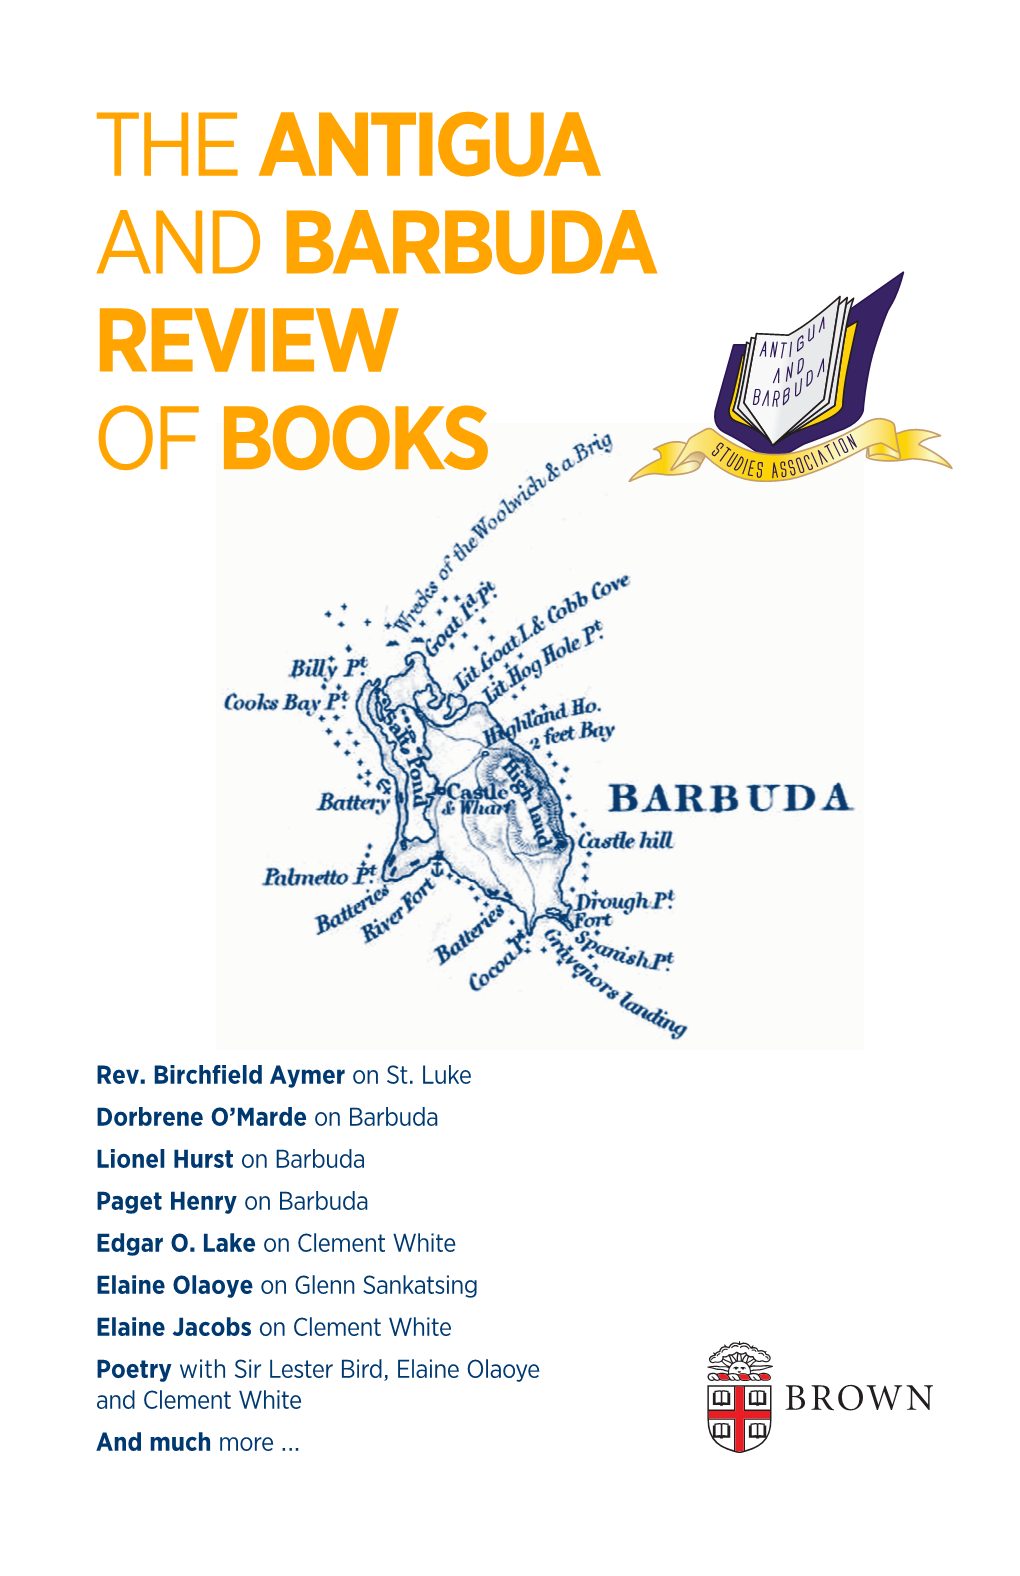 The Antigua and Barbuda Review of Books